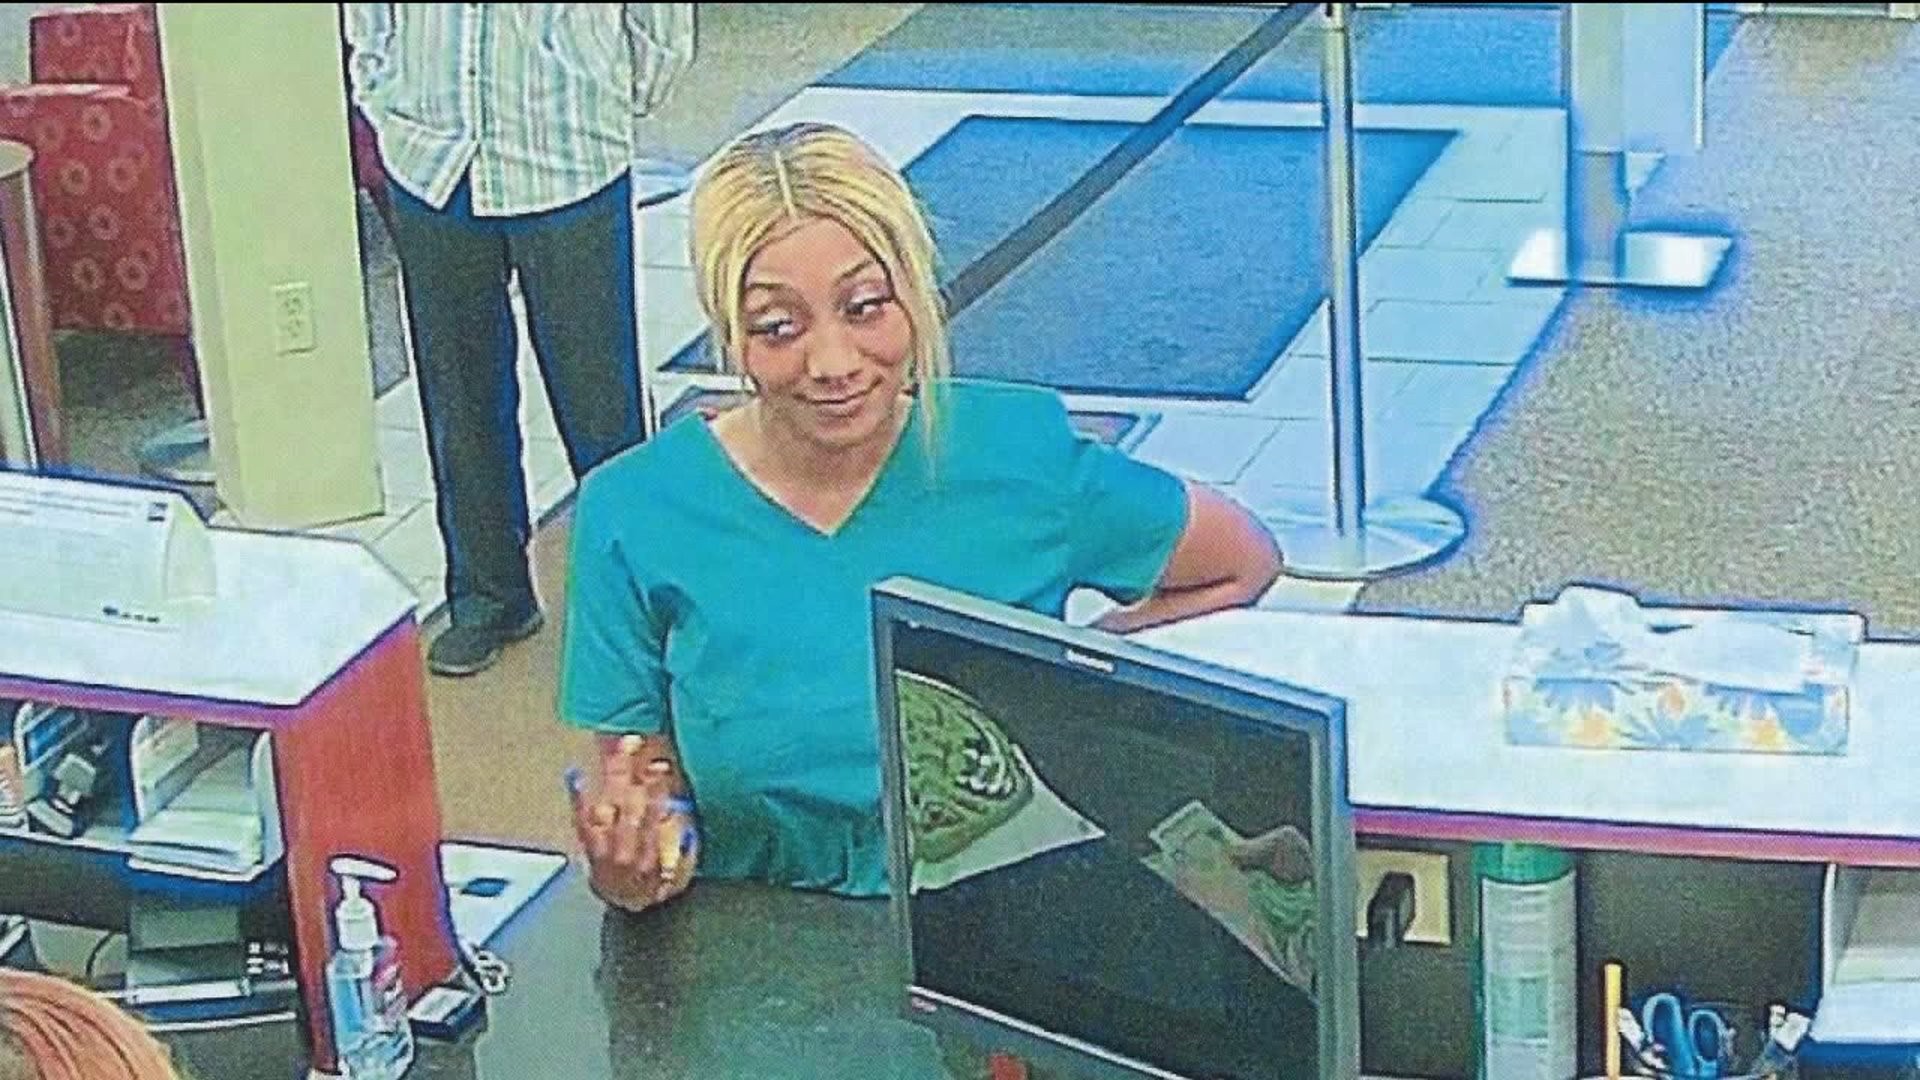 Taylor Police Search for Woman Involved in Bank Scam